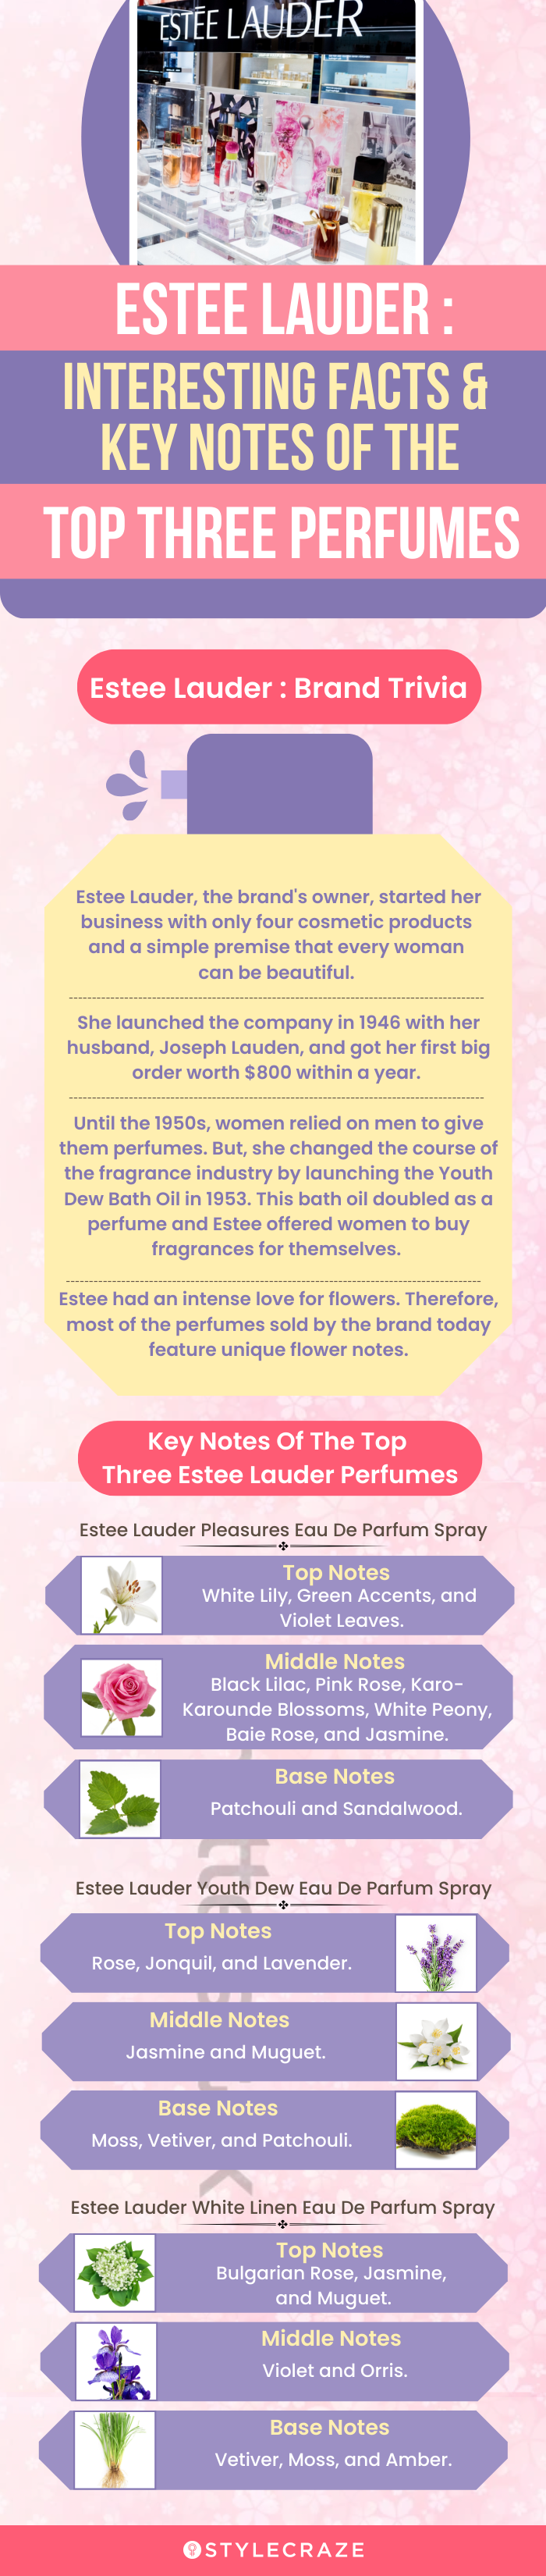 Estee Lauder: Interesting Facts & Key Notes Of The Top Three Perfumes (infographic)